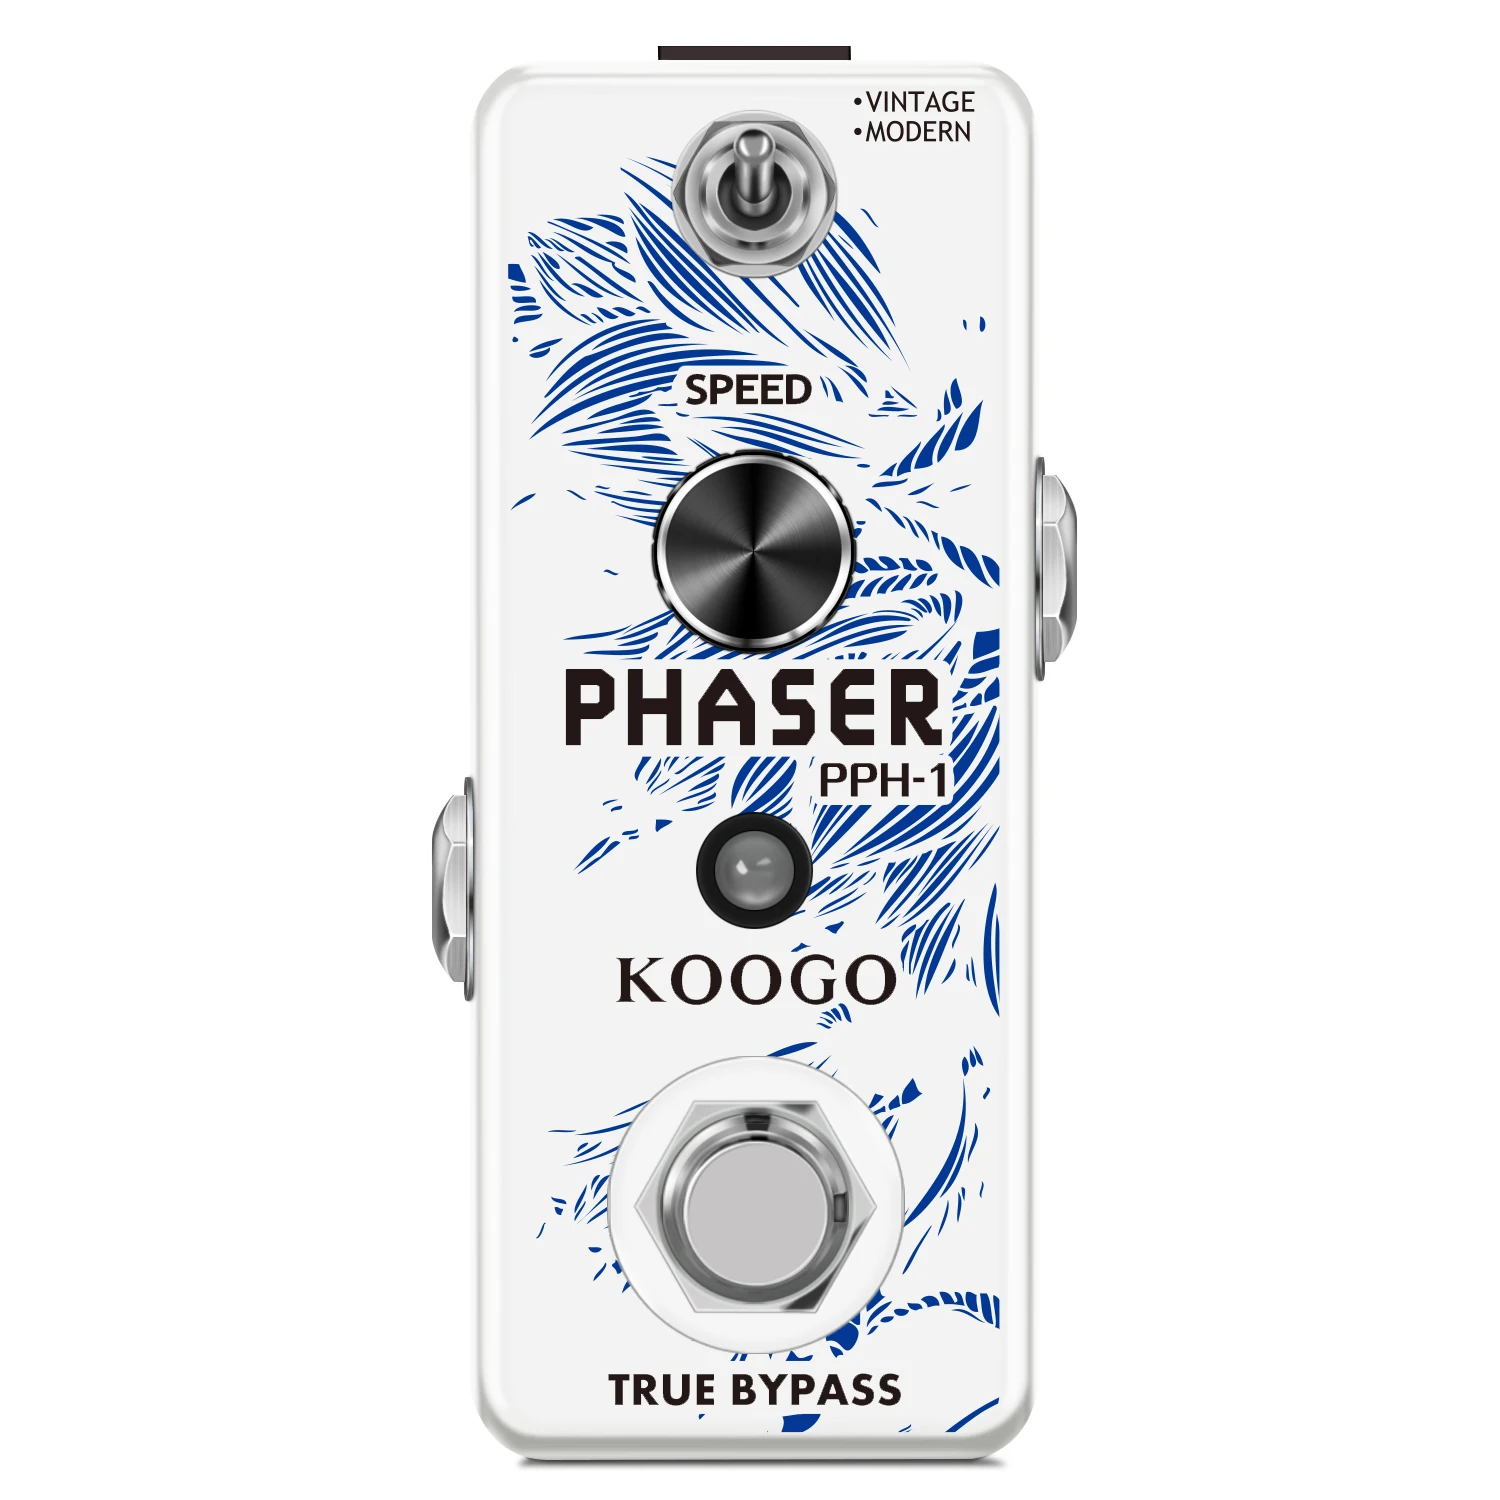 

Koogo LEF-313 Phaser Pedal Analog Phase Effect Pedal For Electric Guitar Vintage & Modern Modes With Mini Size True Bypass